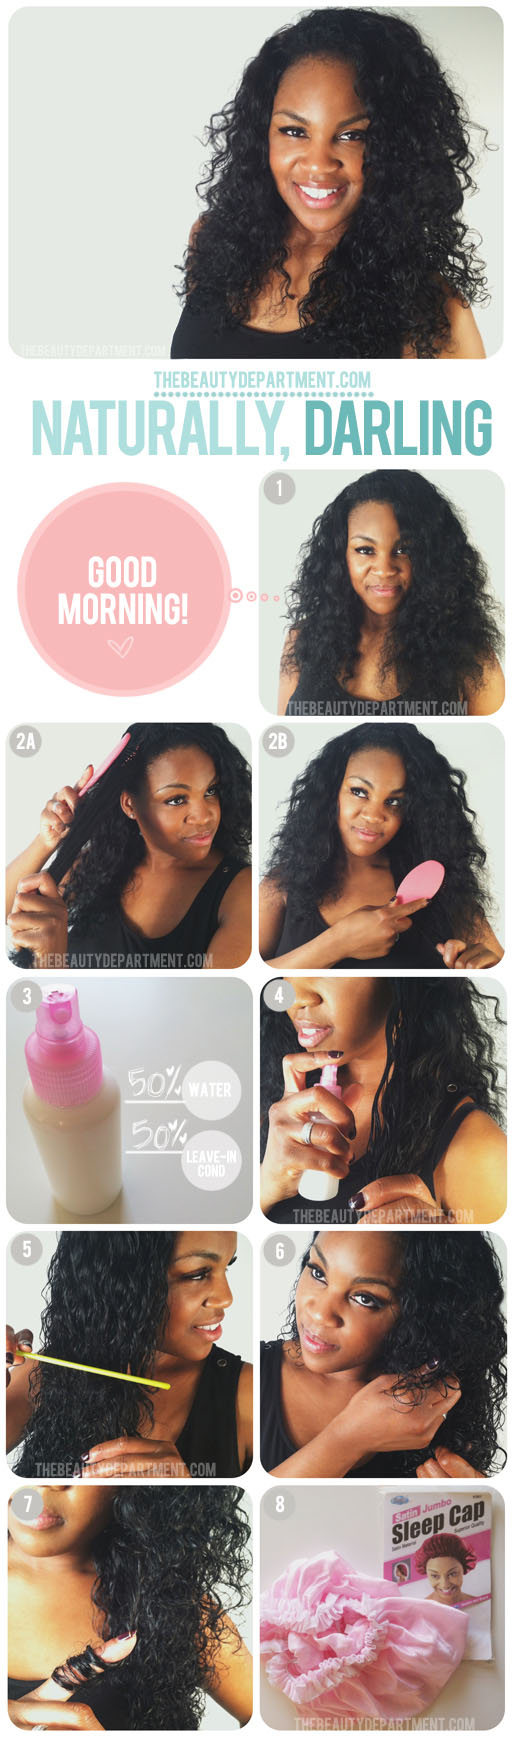 The Beauty Department: Your Daily Dose of Pretty. - REFRESHING CURLY HAIR